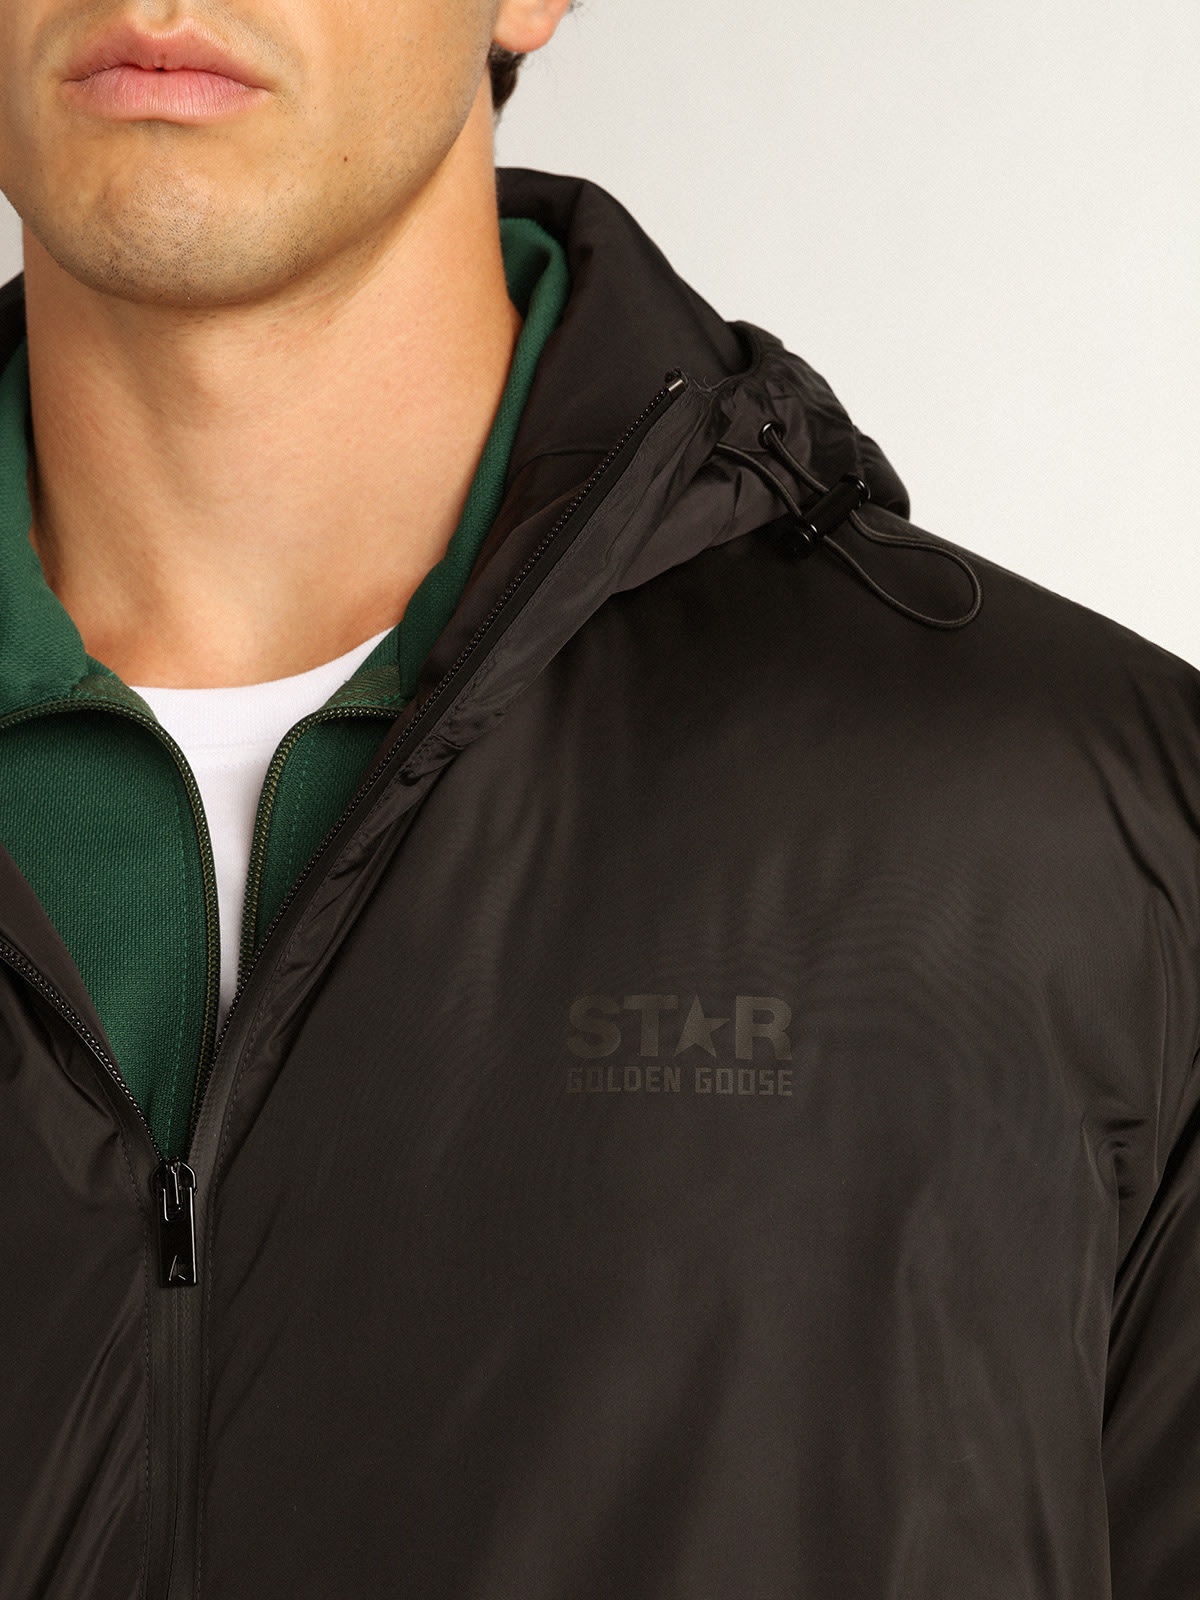 Men’s black Star Collection ankle-length hooded padded jacket - 6